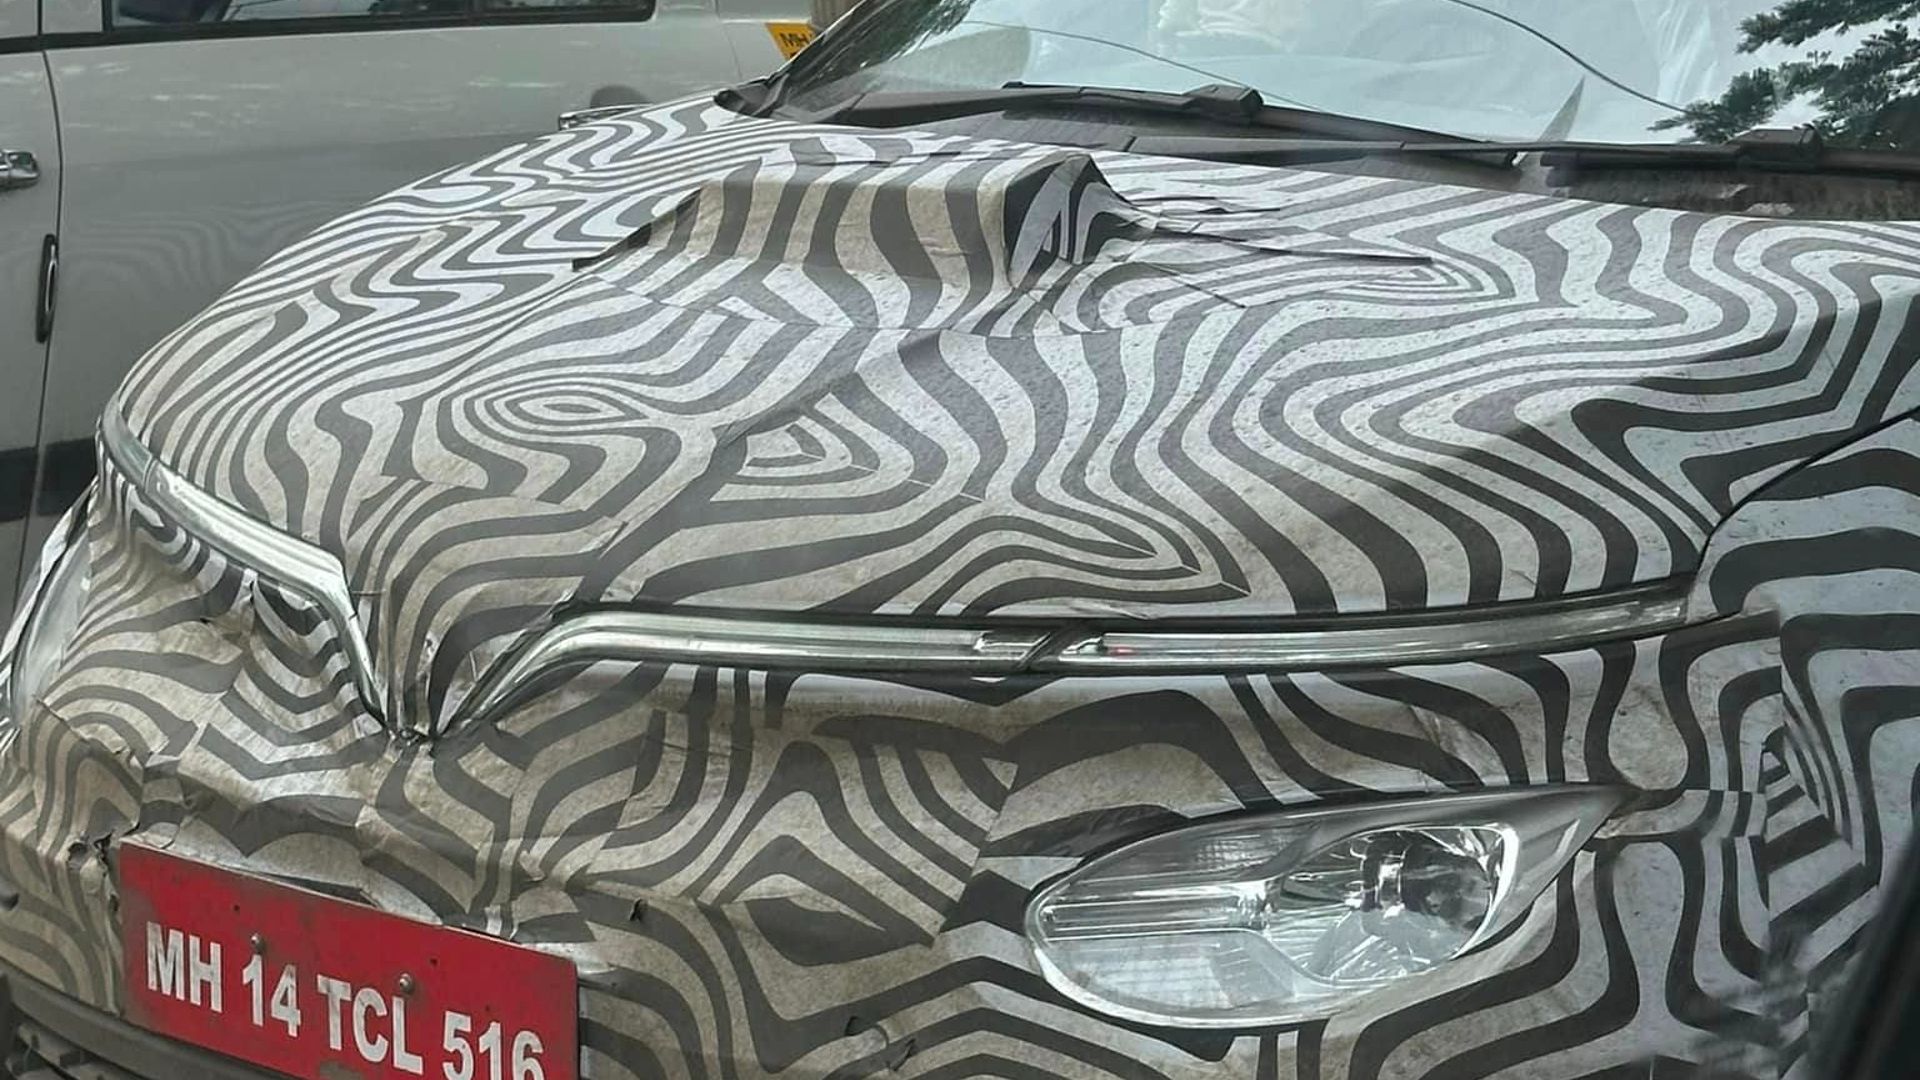 VinFast VF e34 SUV spied on Indian roads (Source: RushLane)